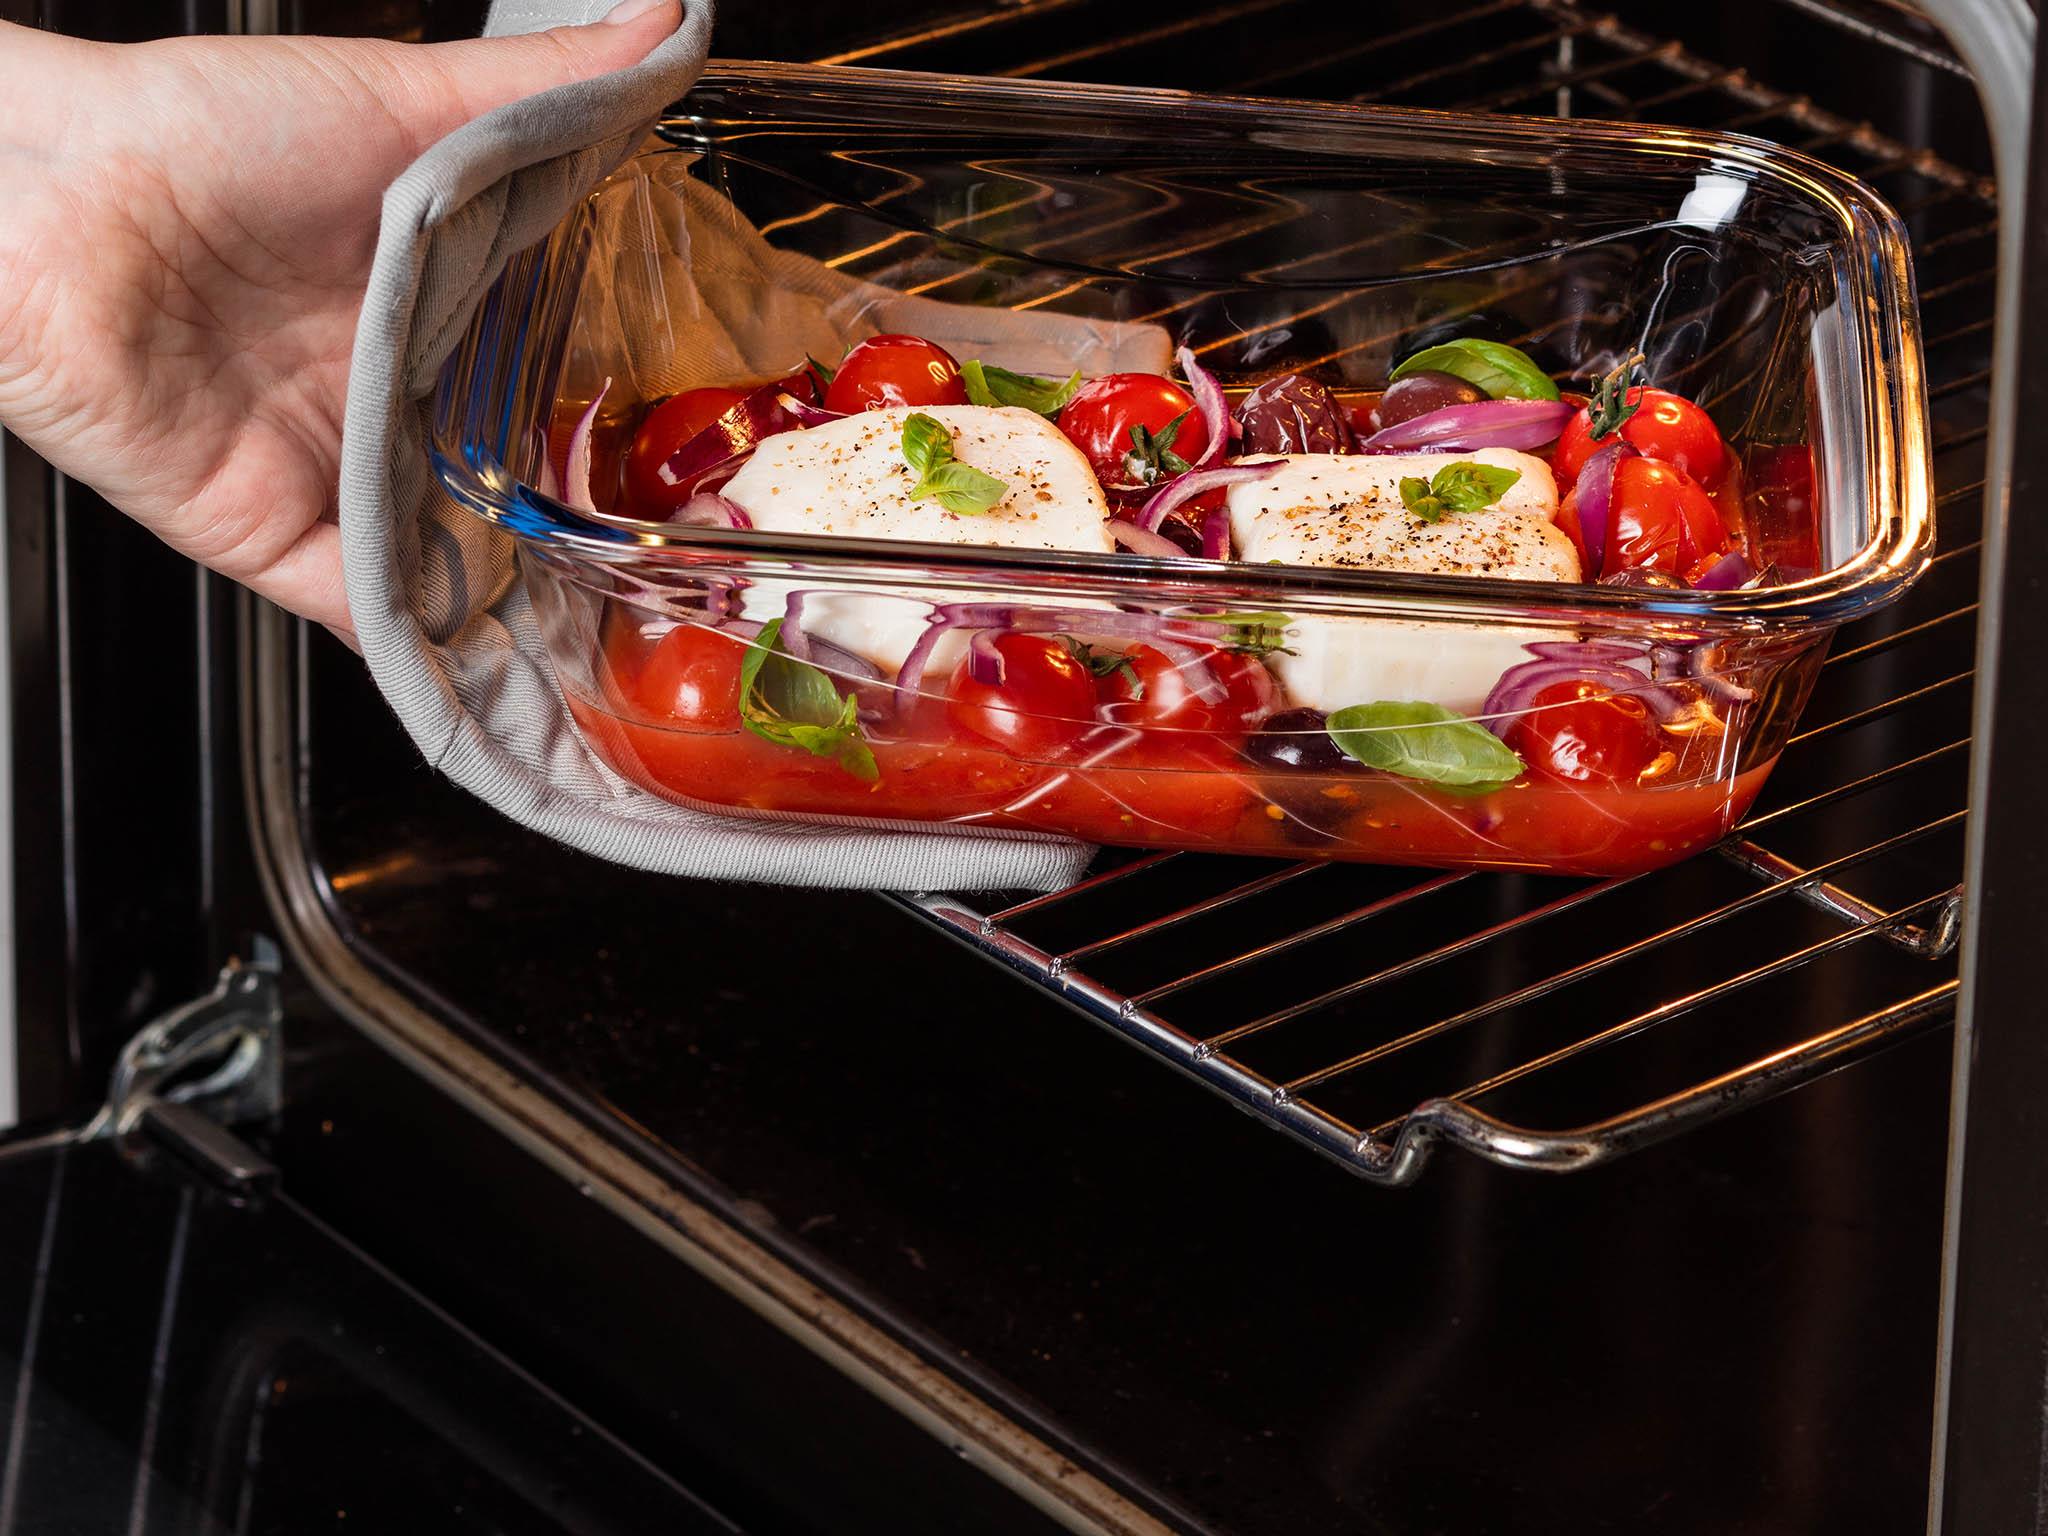 Cooking With Glass: How Pyrex Transformed Every Kitchen Into a